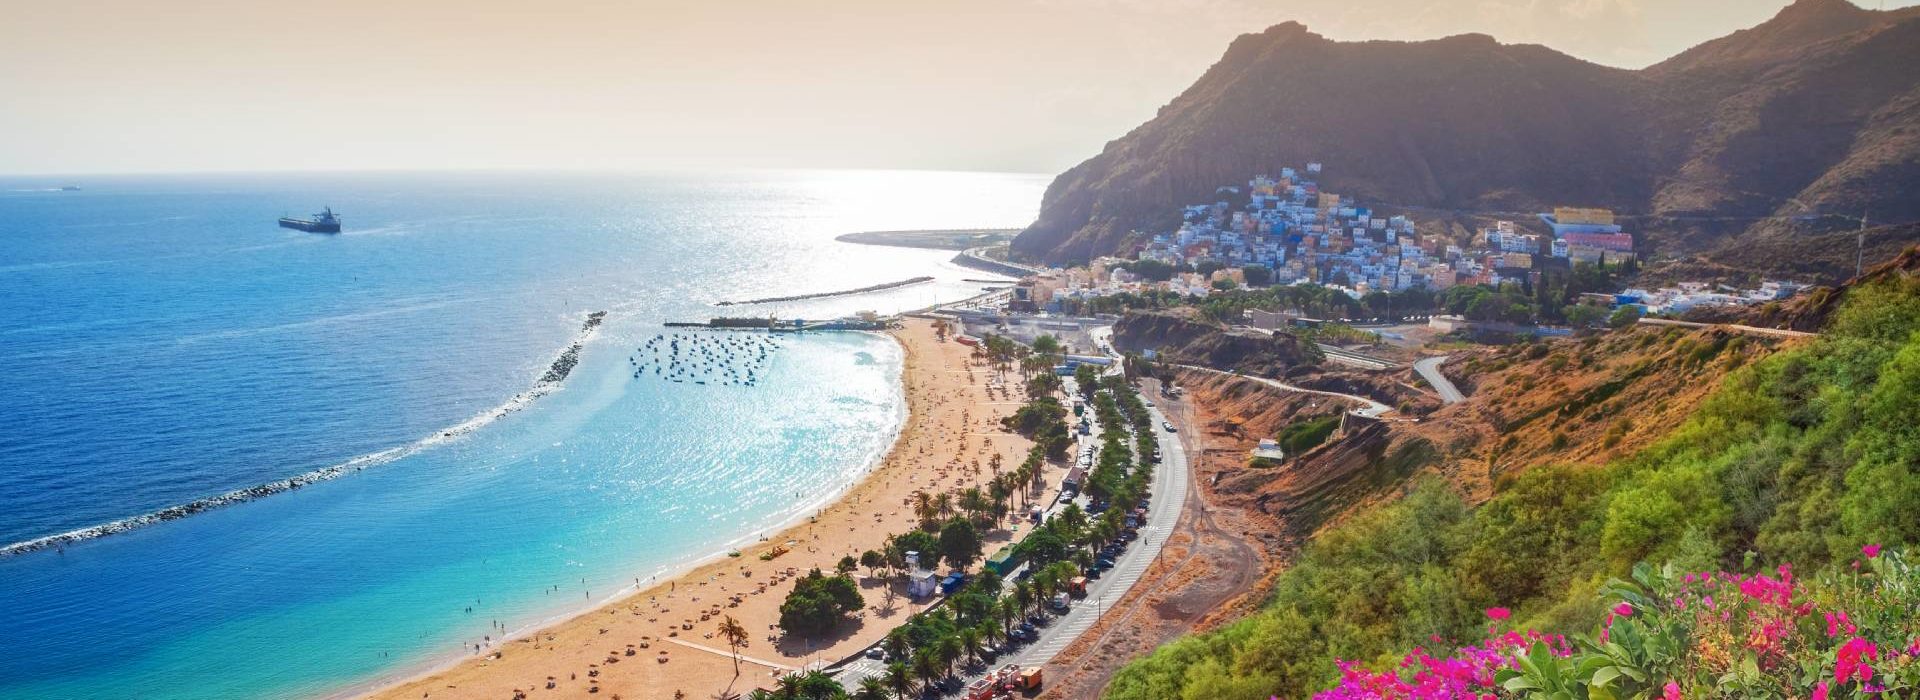 Tenerife Travel Guide: Best Things to do in Tenerife | Broadway Travel